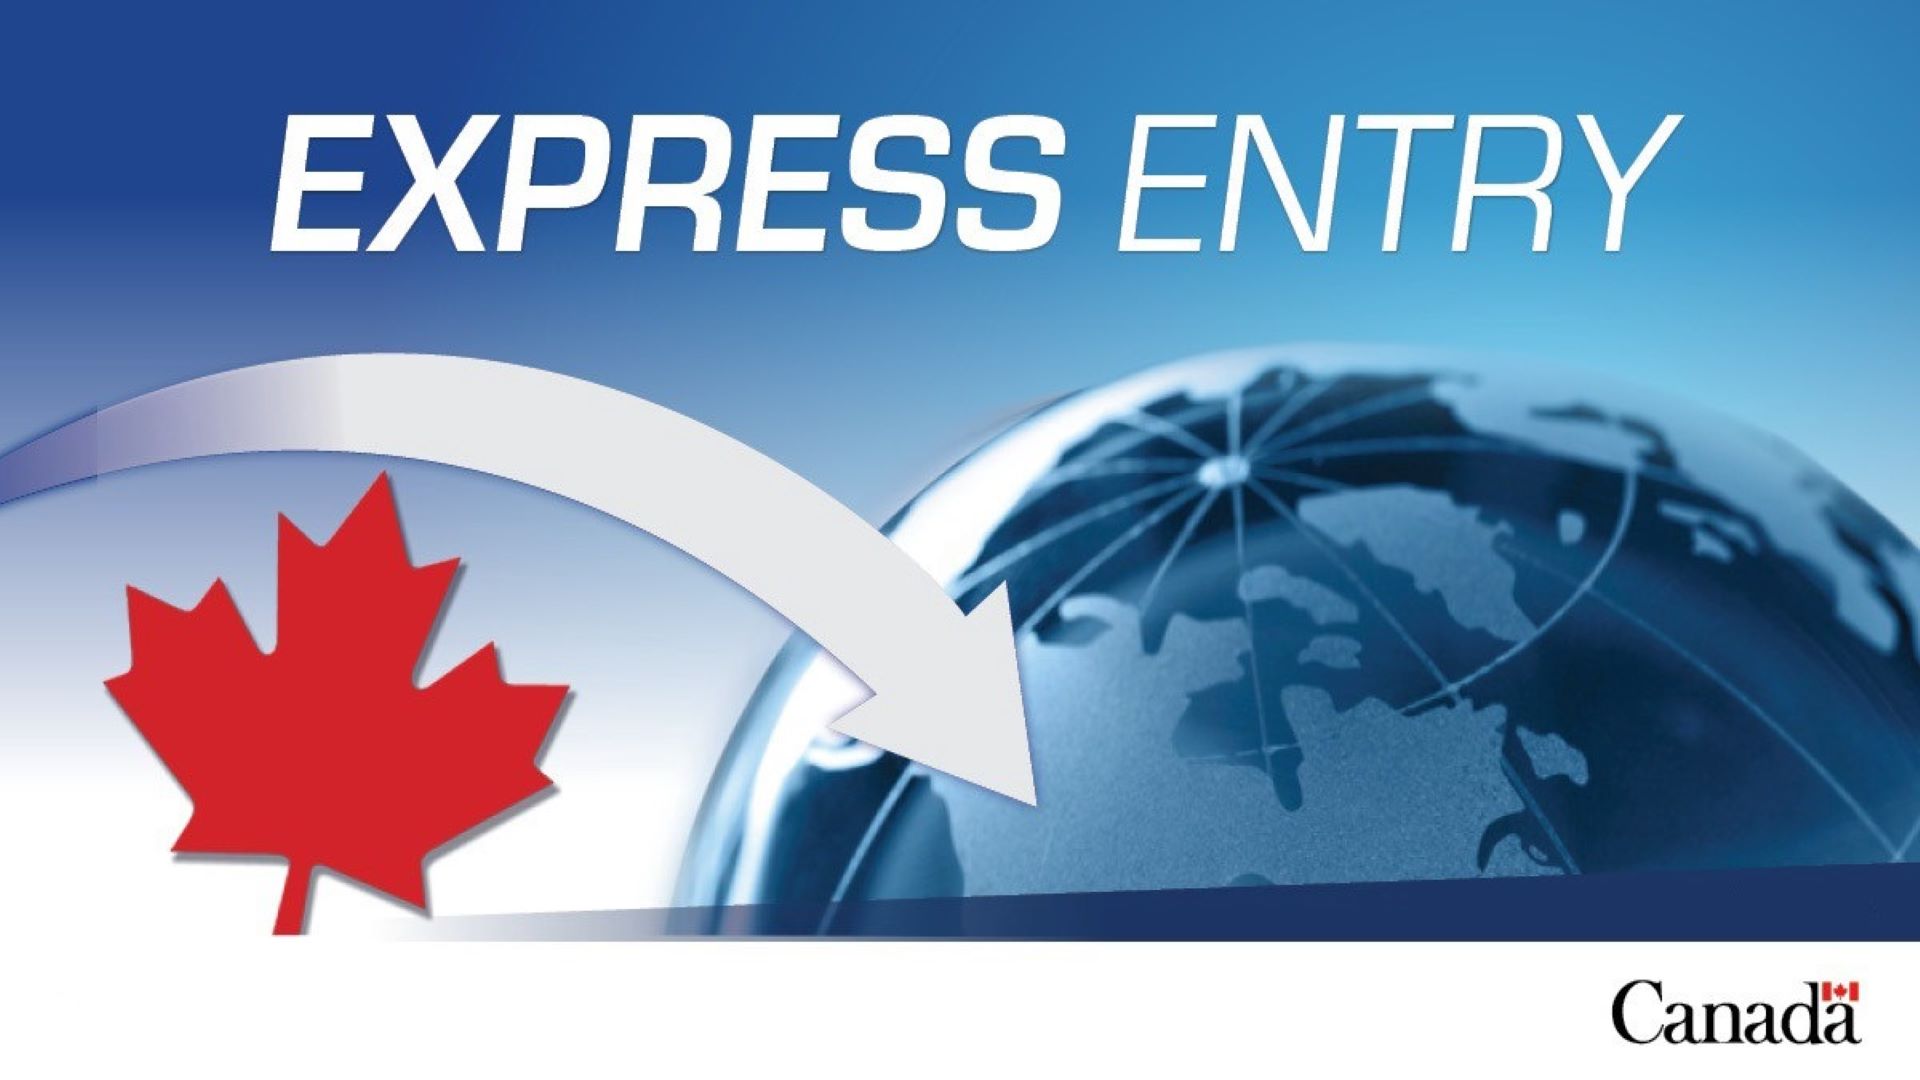 Canada Express Entry: Rounds of Invitations on 13th February 2021